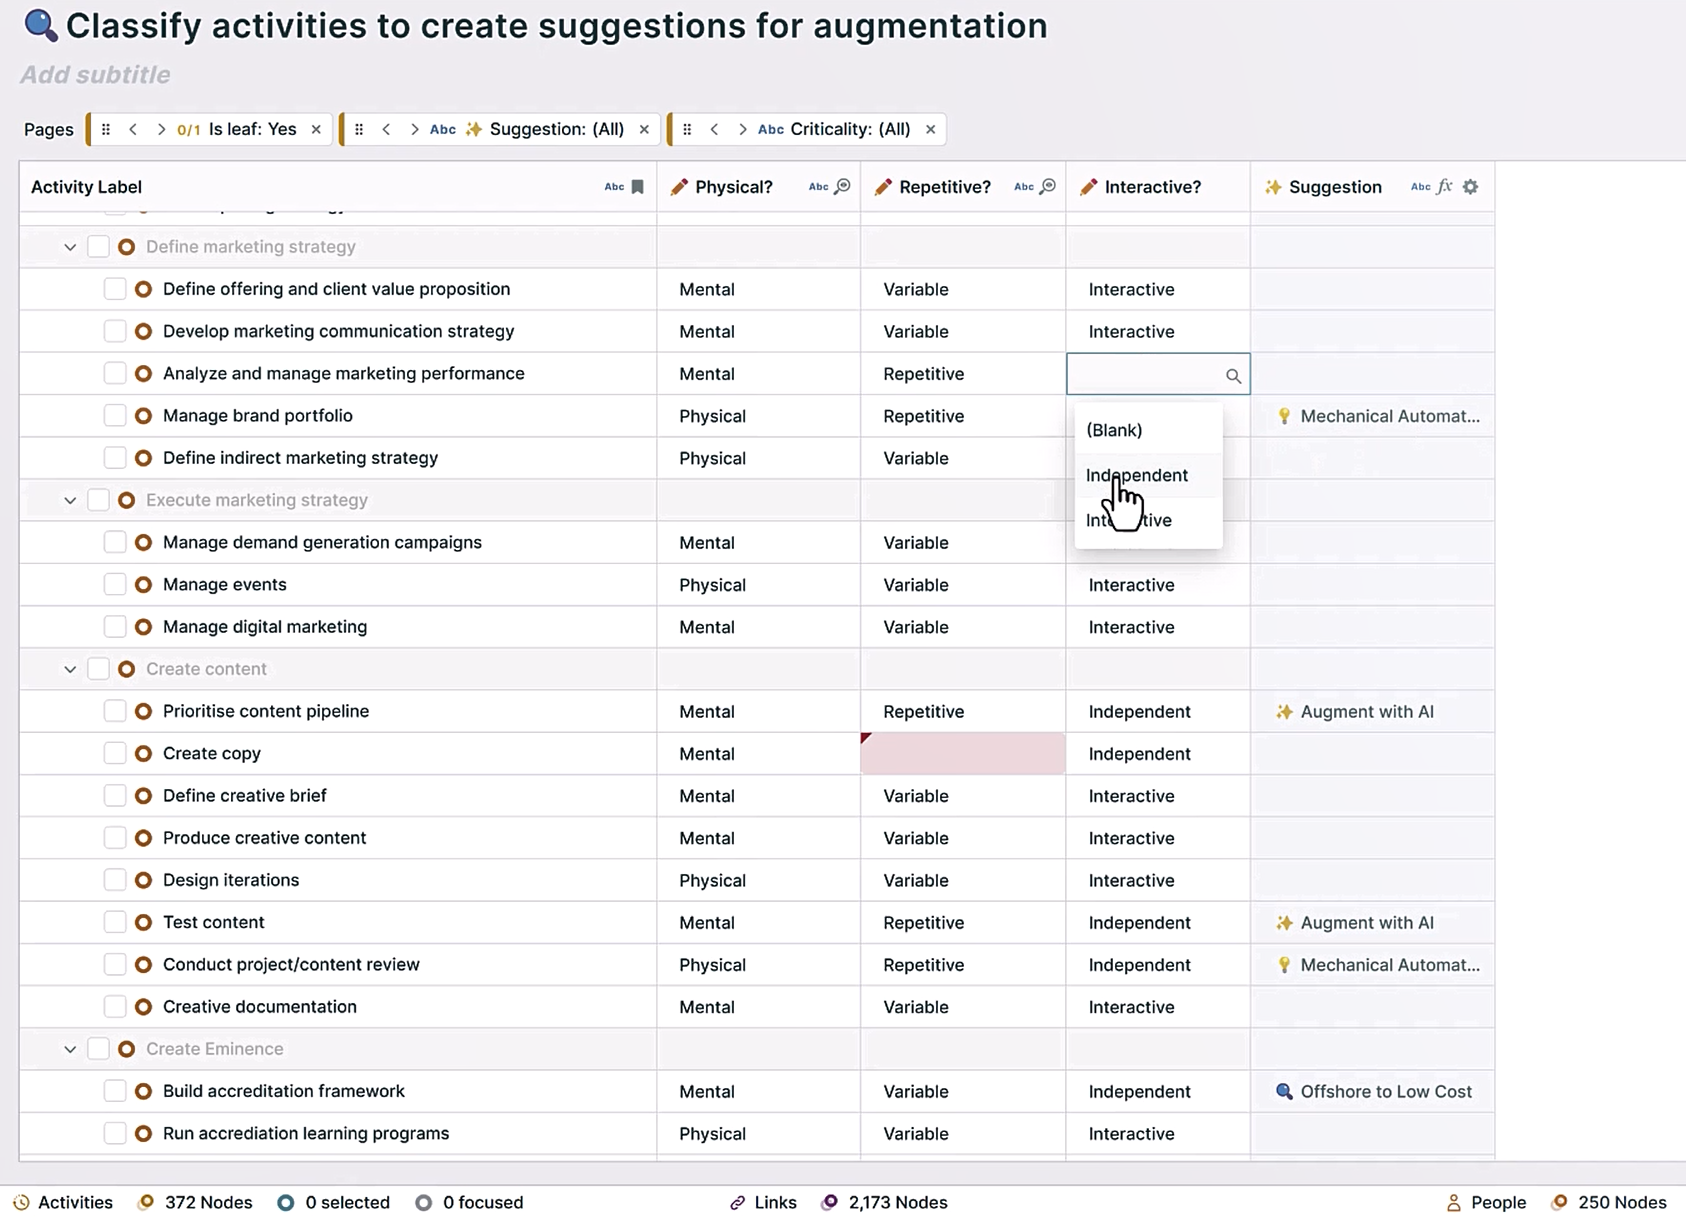 A screenshot from Orgvue - 'Classify activities to create suggestions for augementation'